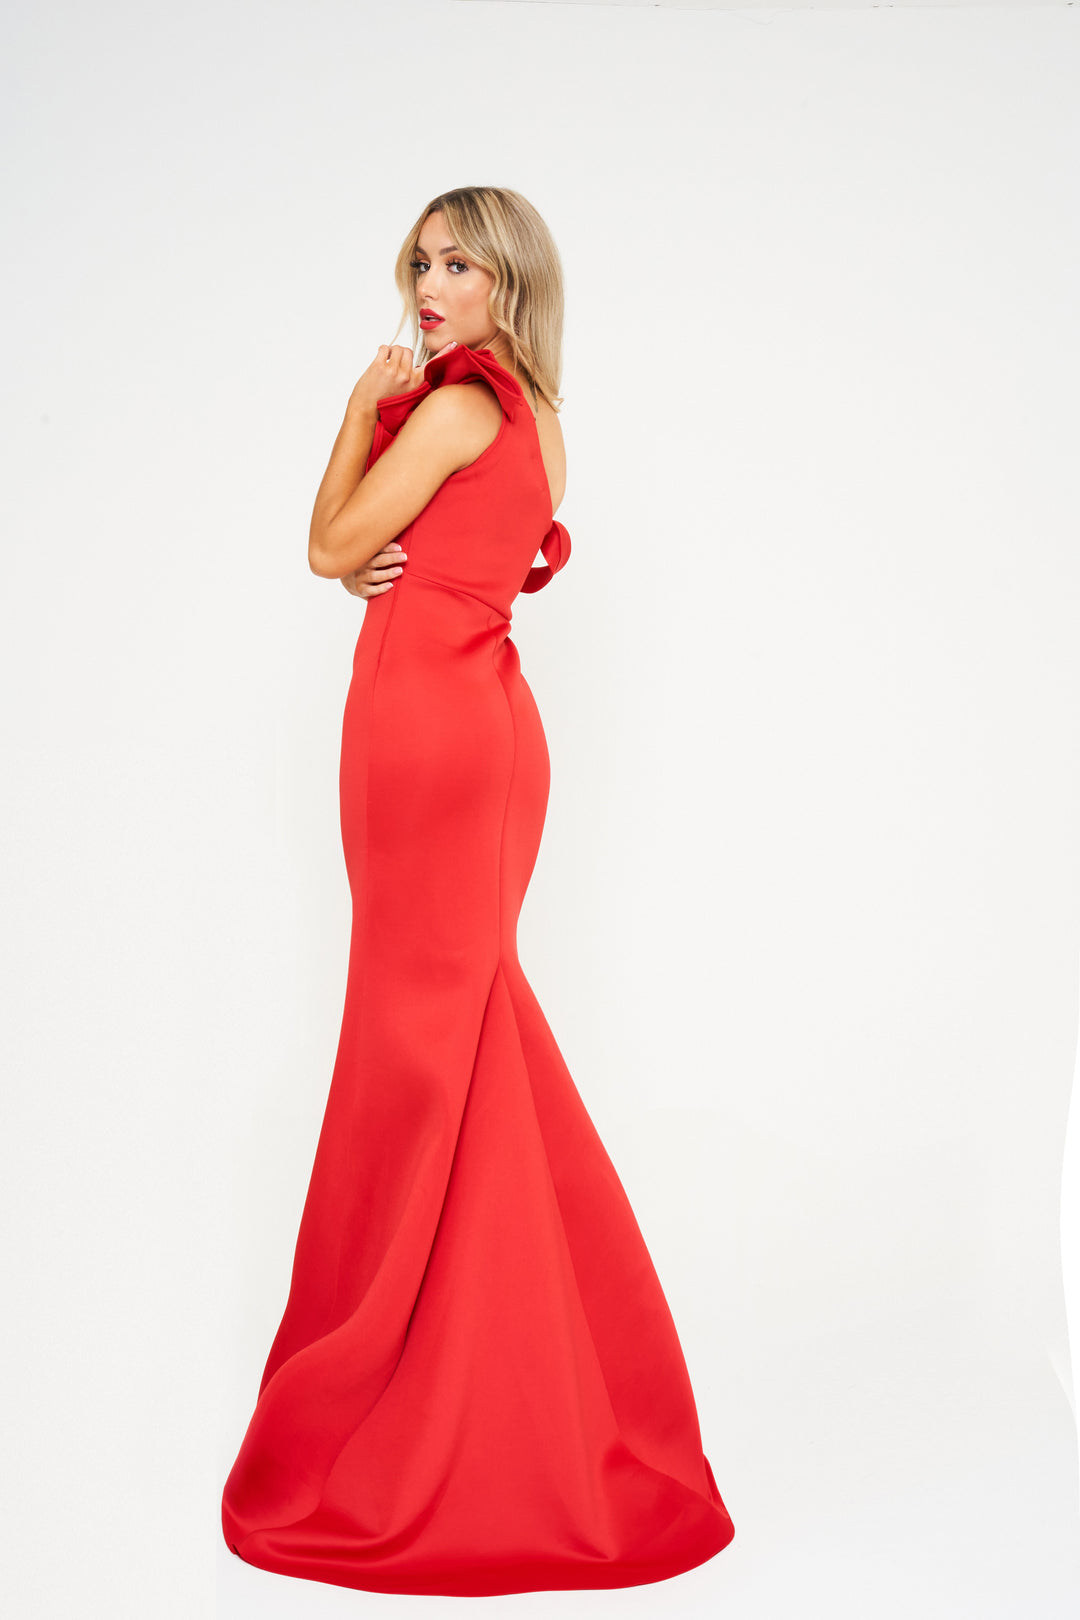 Red Frilled One Shoulder Maxi Dress - Back View Standing Up